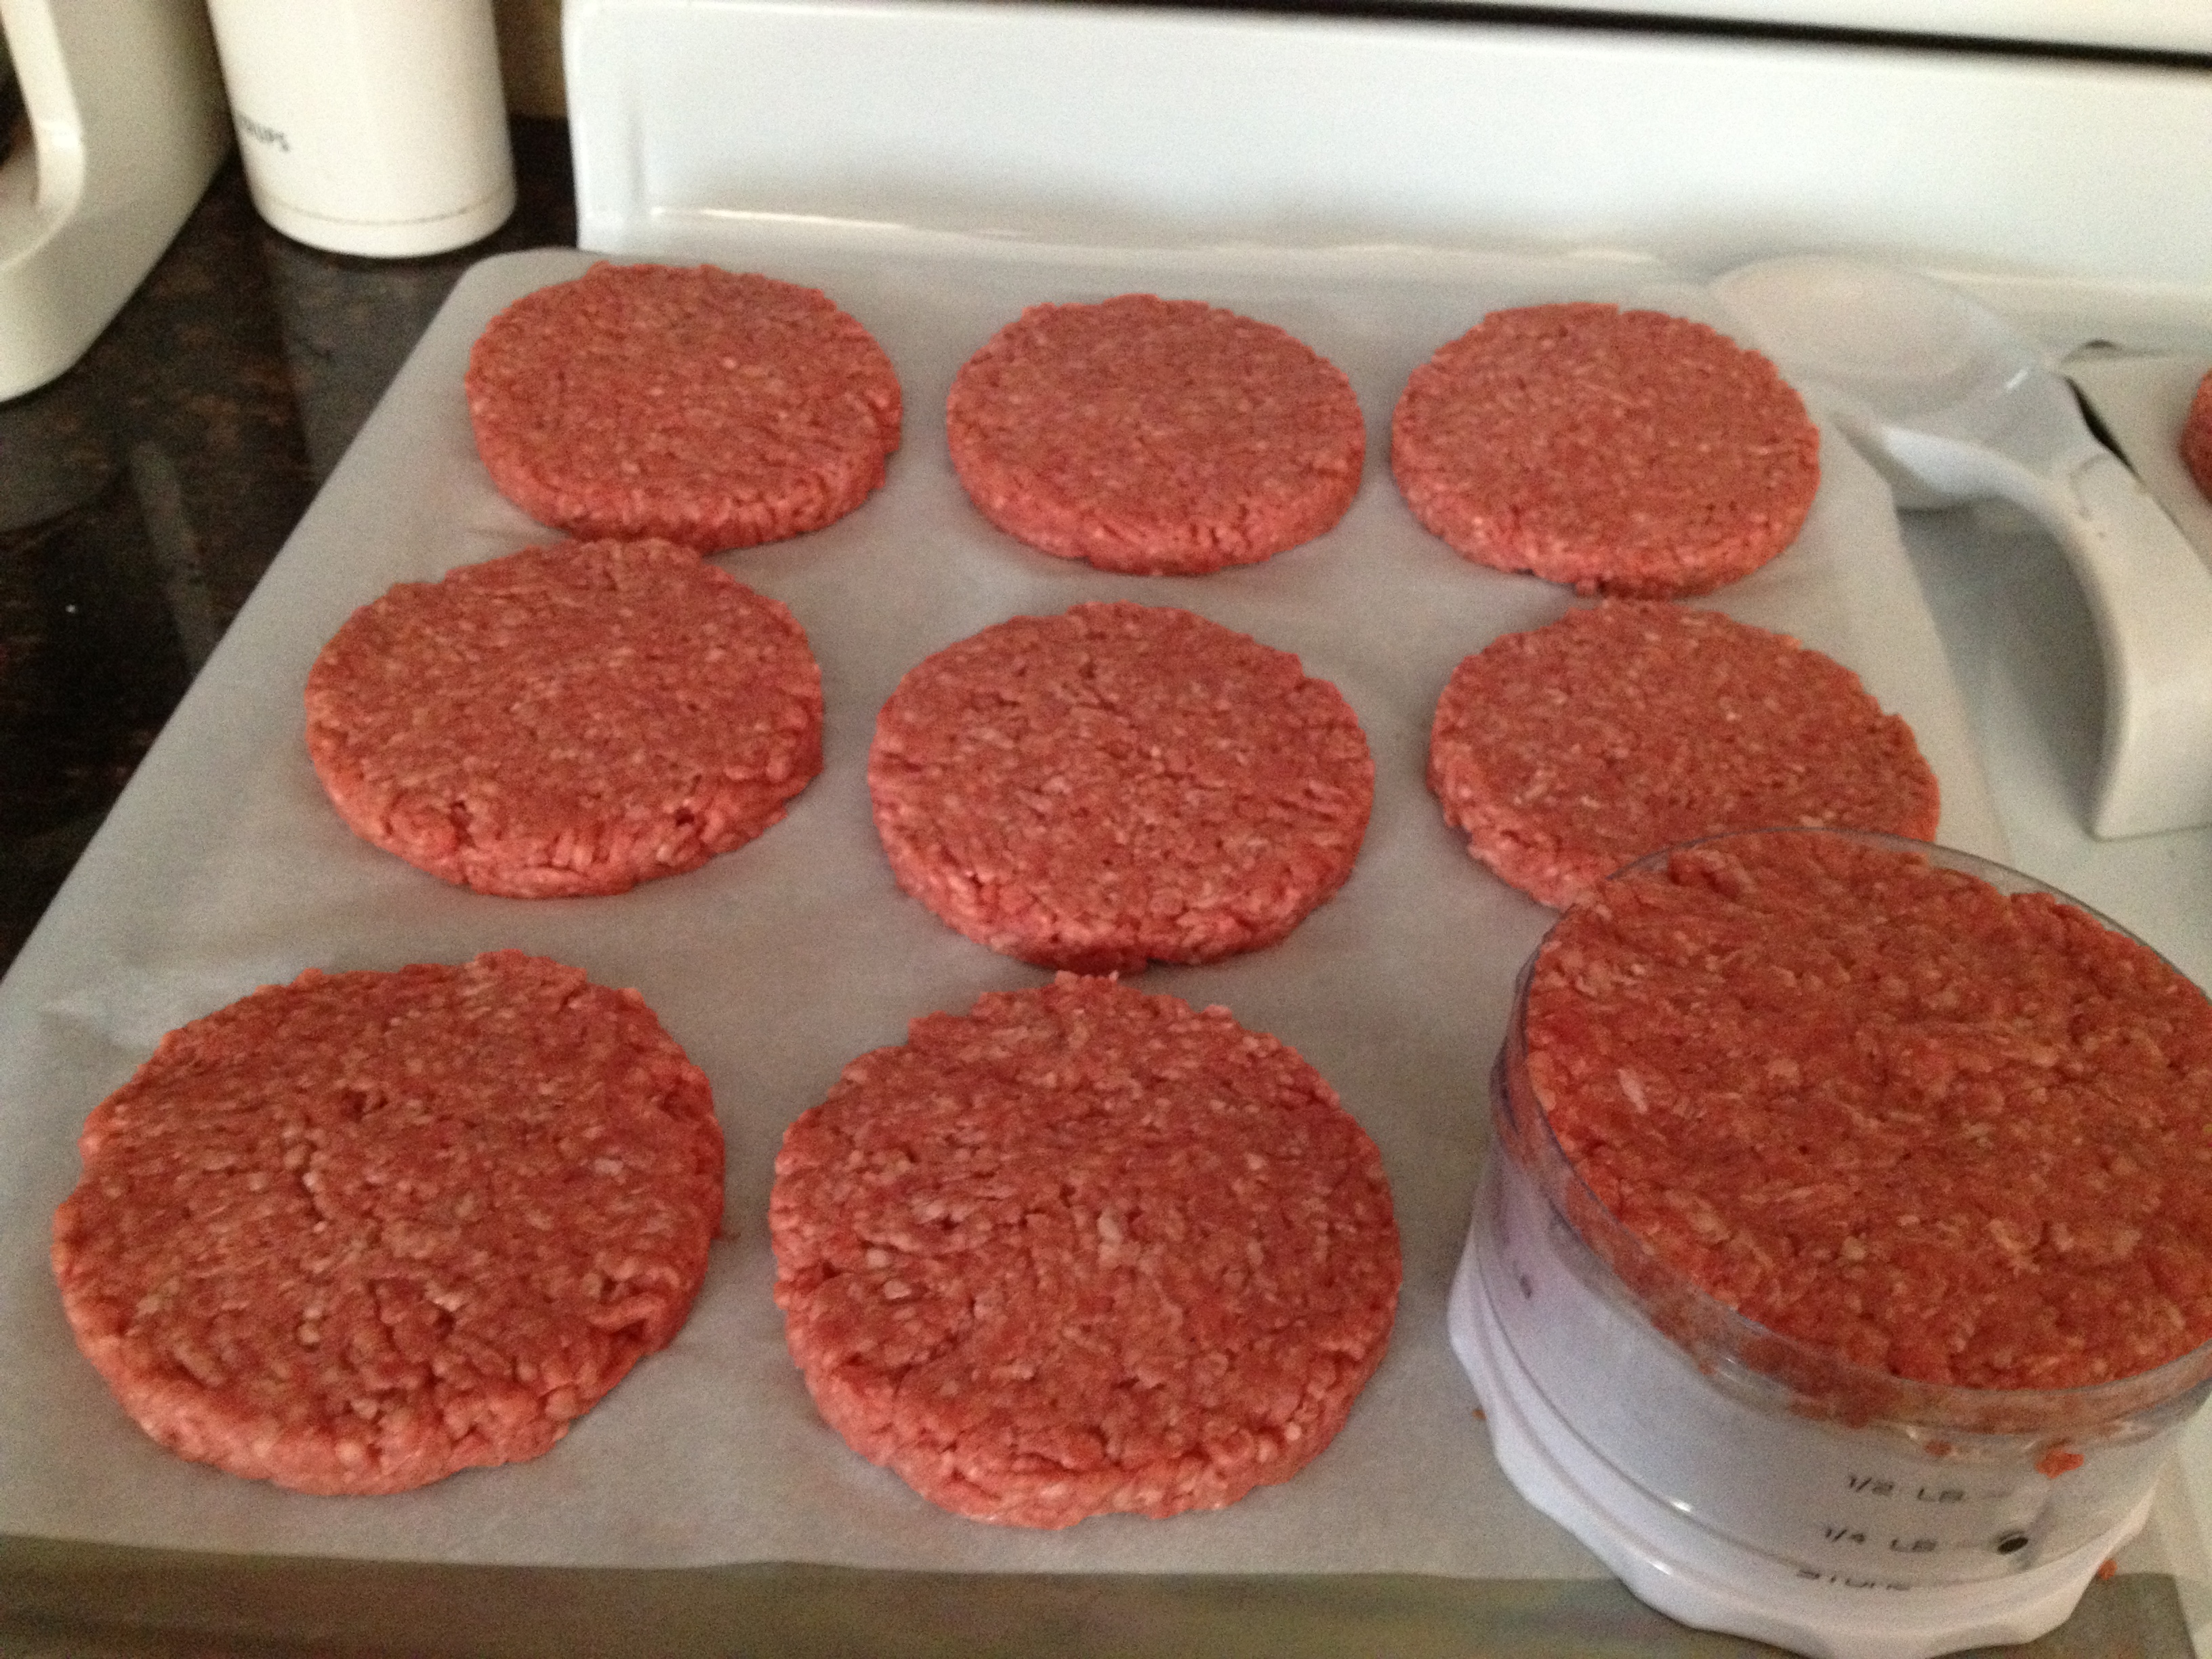 Save Time and Money: Make Your Own Preformed Frozen Burger Patties